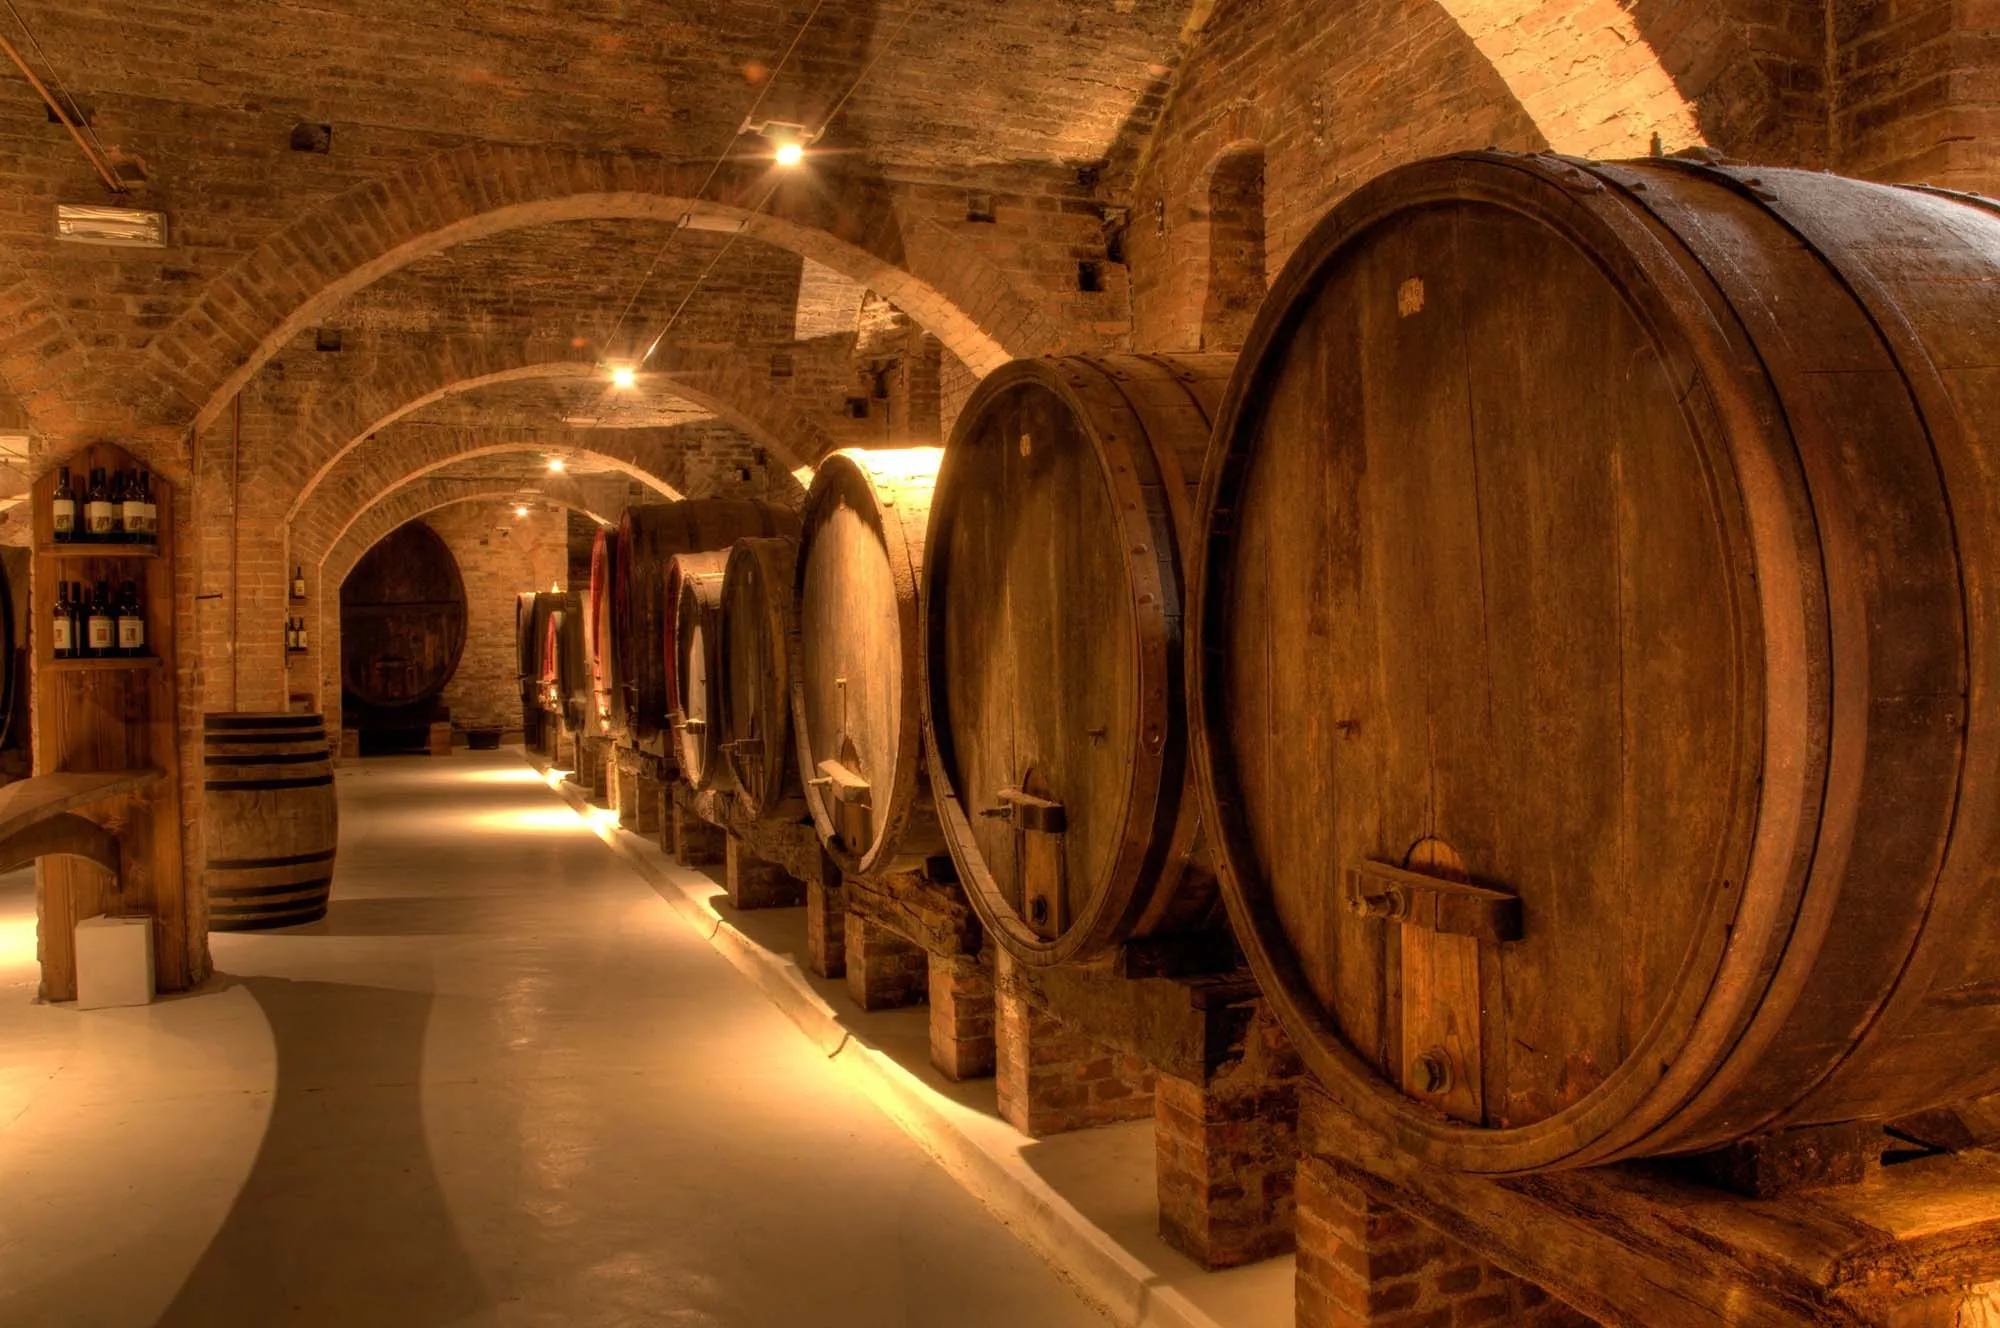 Citizens Hospital Winery in Germany, Europe | Wineries - Rated 0.8